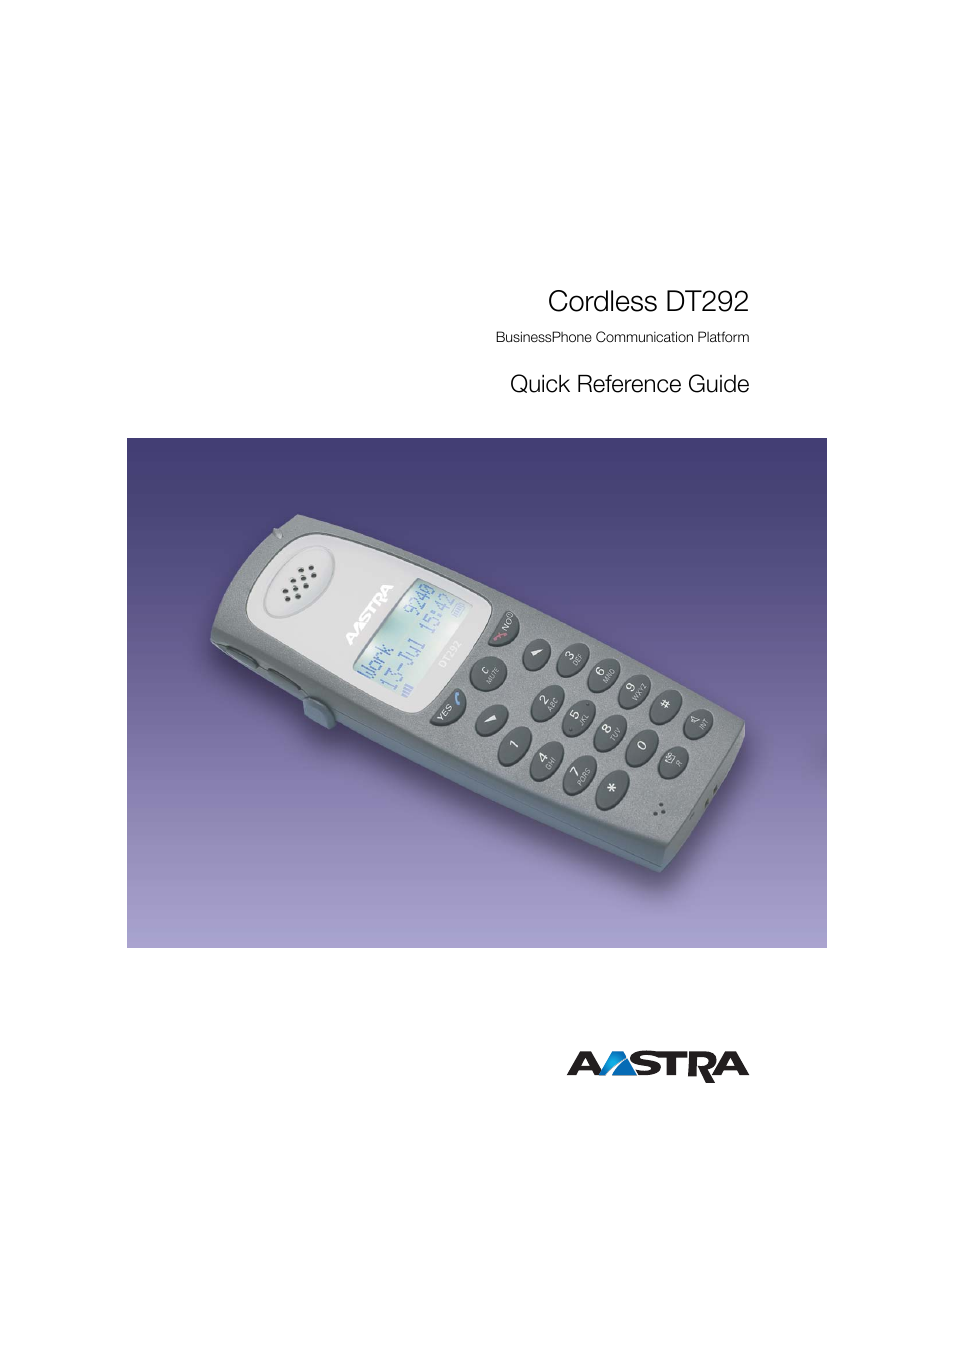 DT292 for BusinessPhone Quick Reference Guide